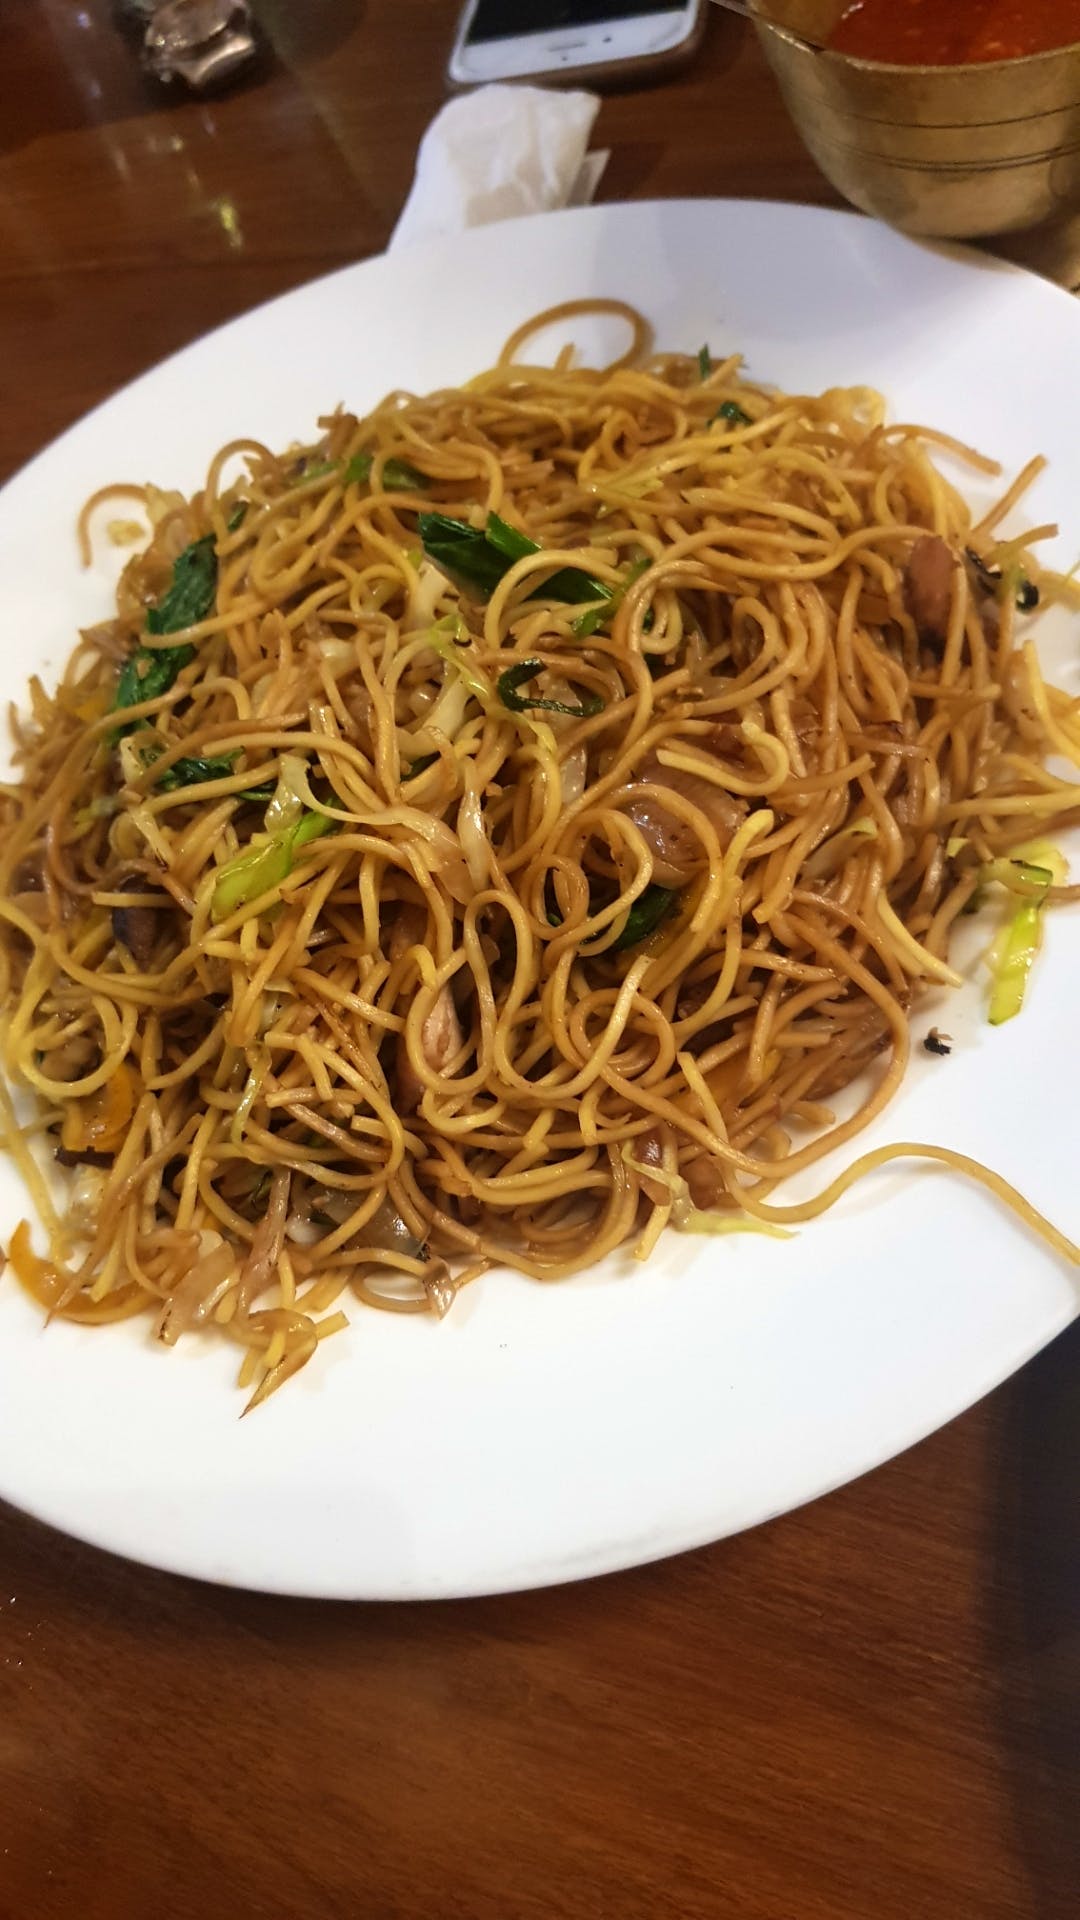 Dish,Noodle,Food,Chow mein,Fried noodles,Spaghetti,Chinese noodles,Cuisine,Yakisoba,Hokkien mee